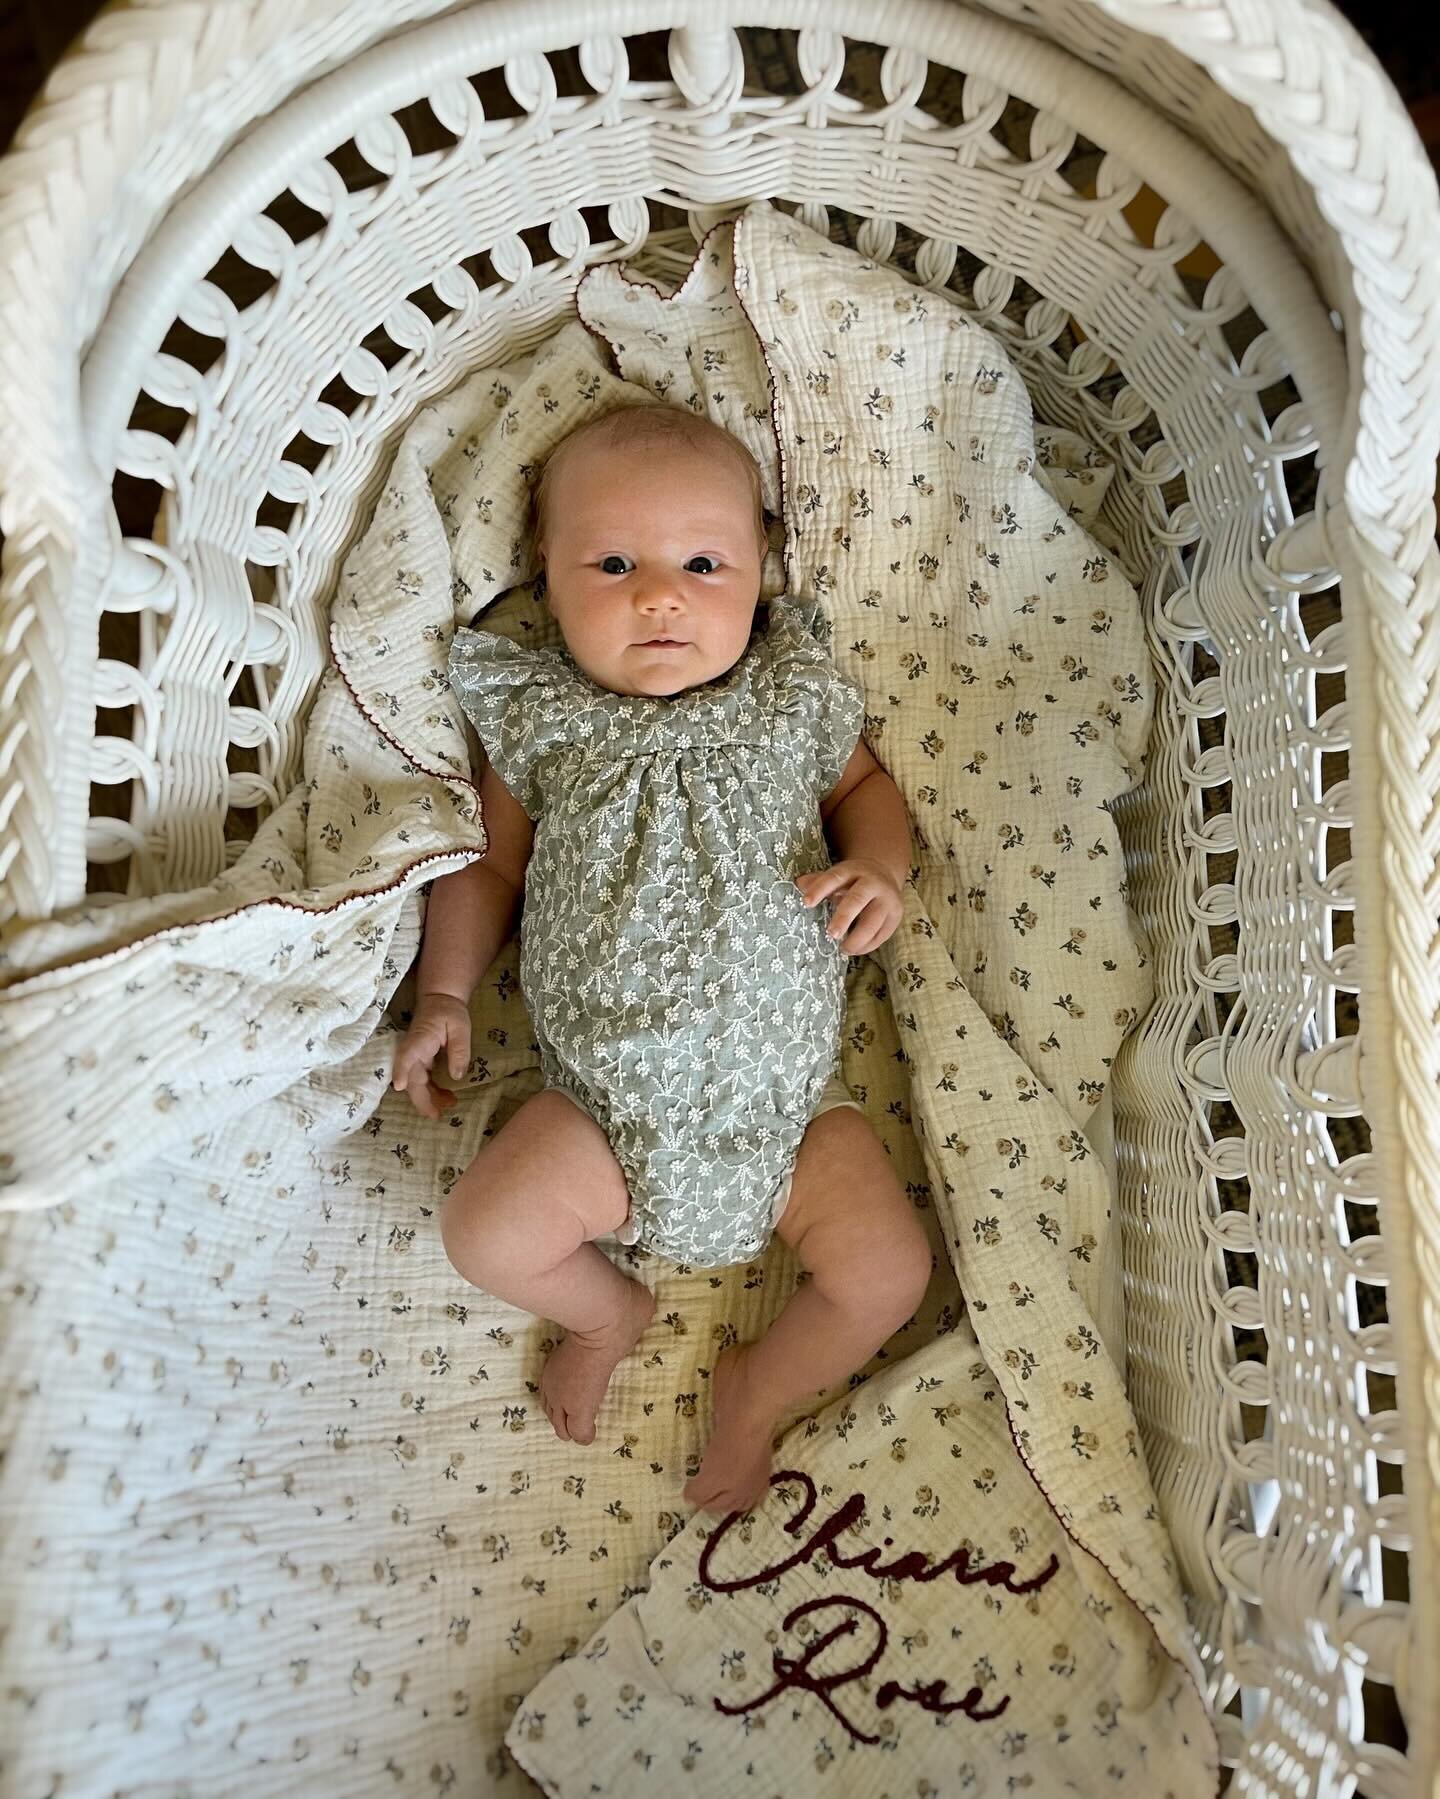 We just returned from such a beautiful weekend in Phoenix celebrating the baptism of our newest goddaughter, Chiara Rose! 

I just cannot even get over God&rsquo;s hand in it all. Our Isabella Rose was born on Divine Mercy last year making it clear t